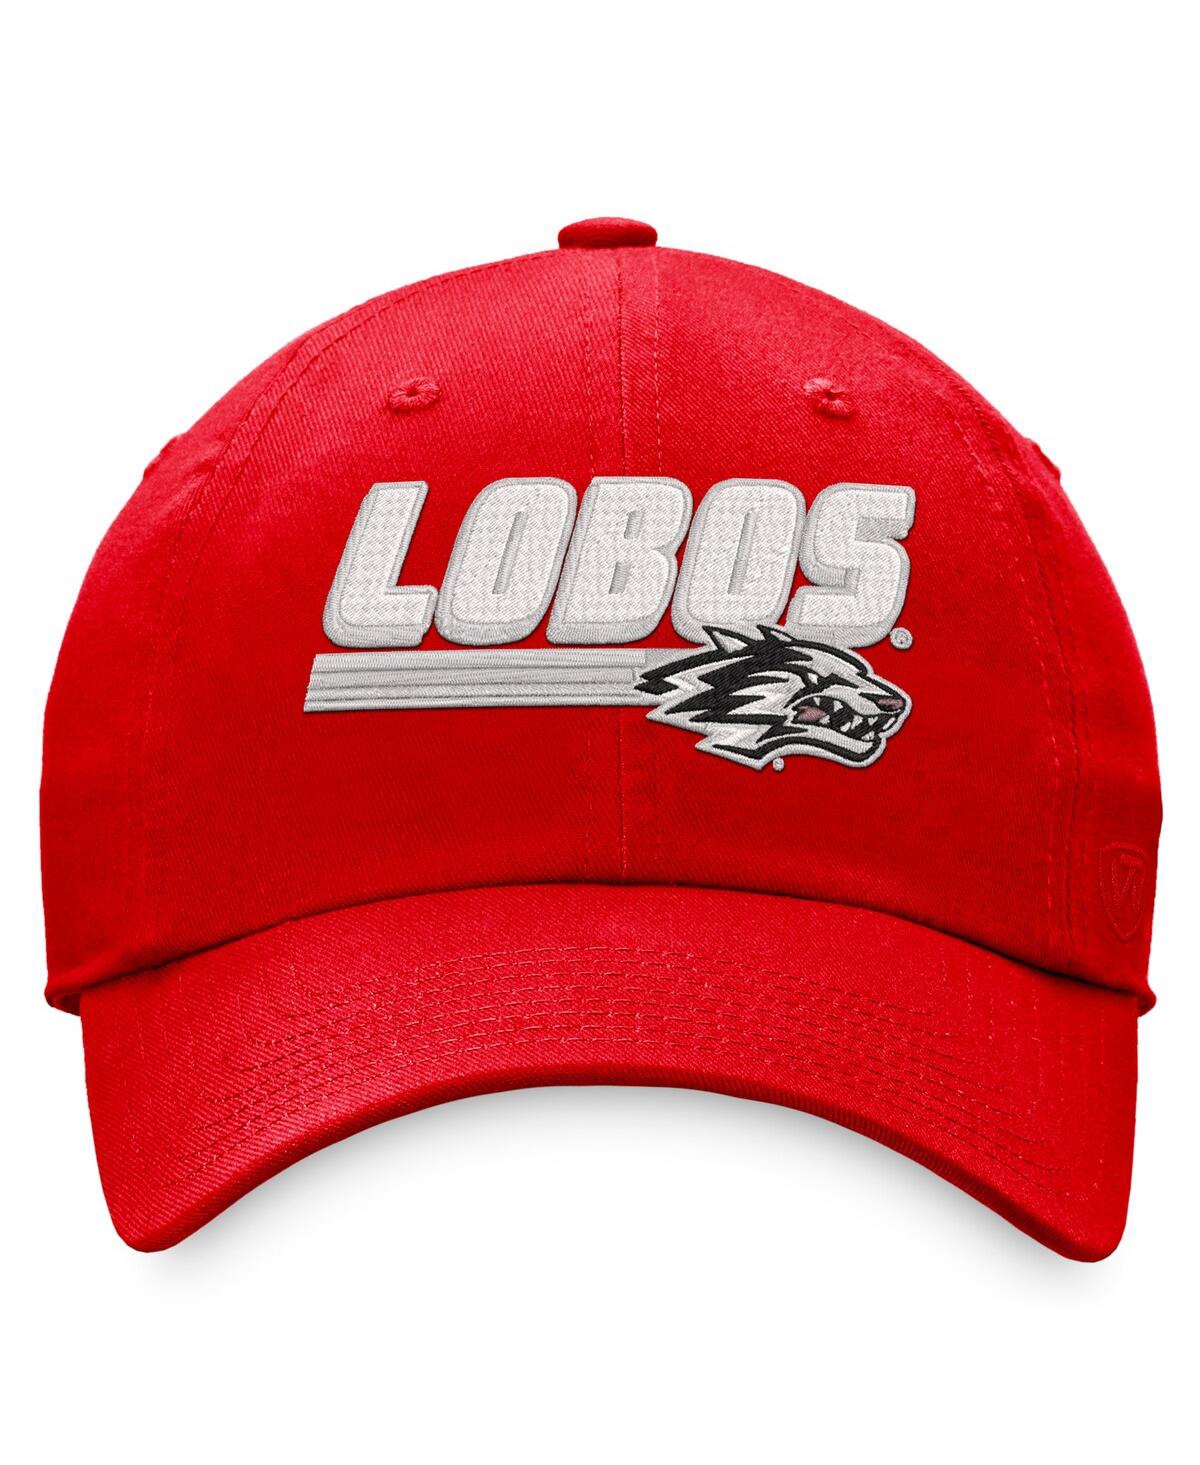 Shop Top Of The World Men's  Red New Mexico Lobos Slice Adjustable Hat